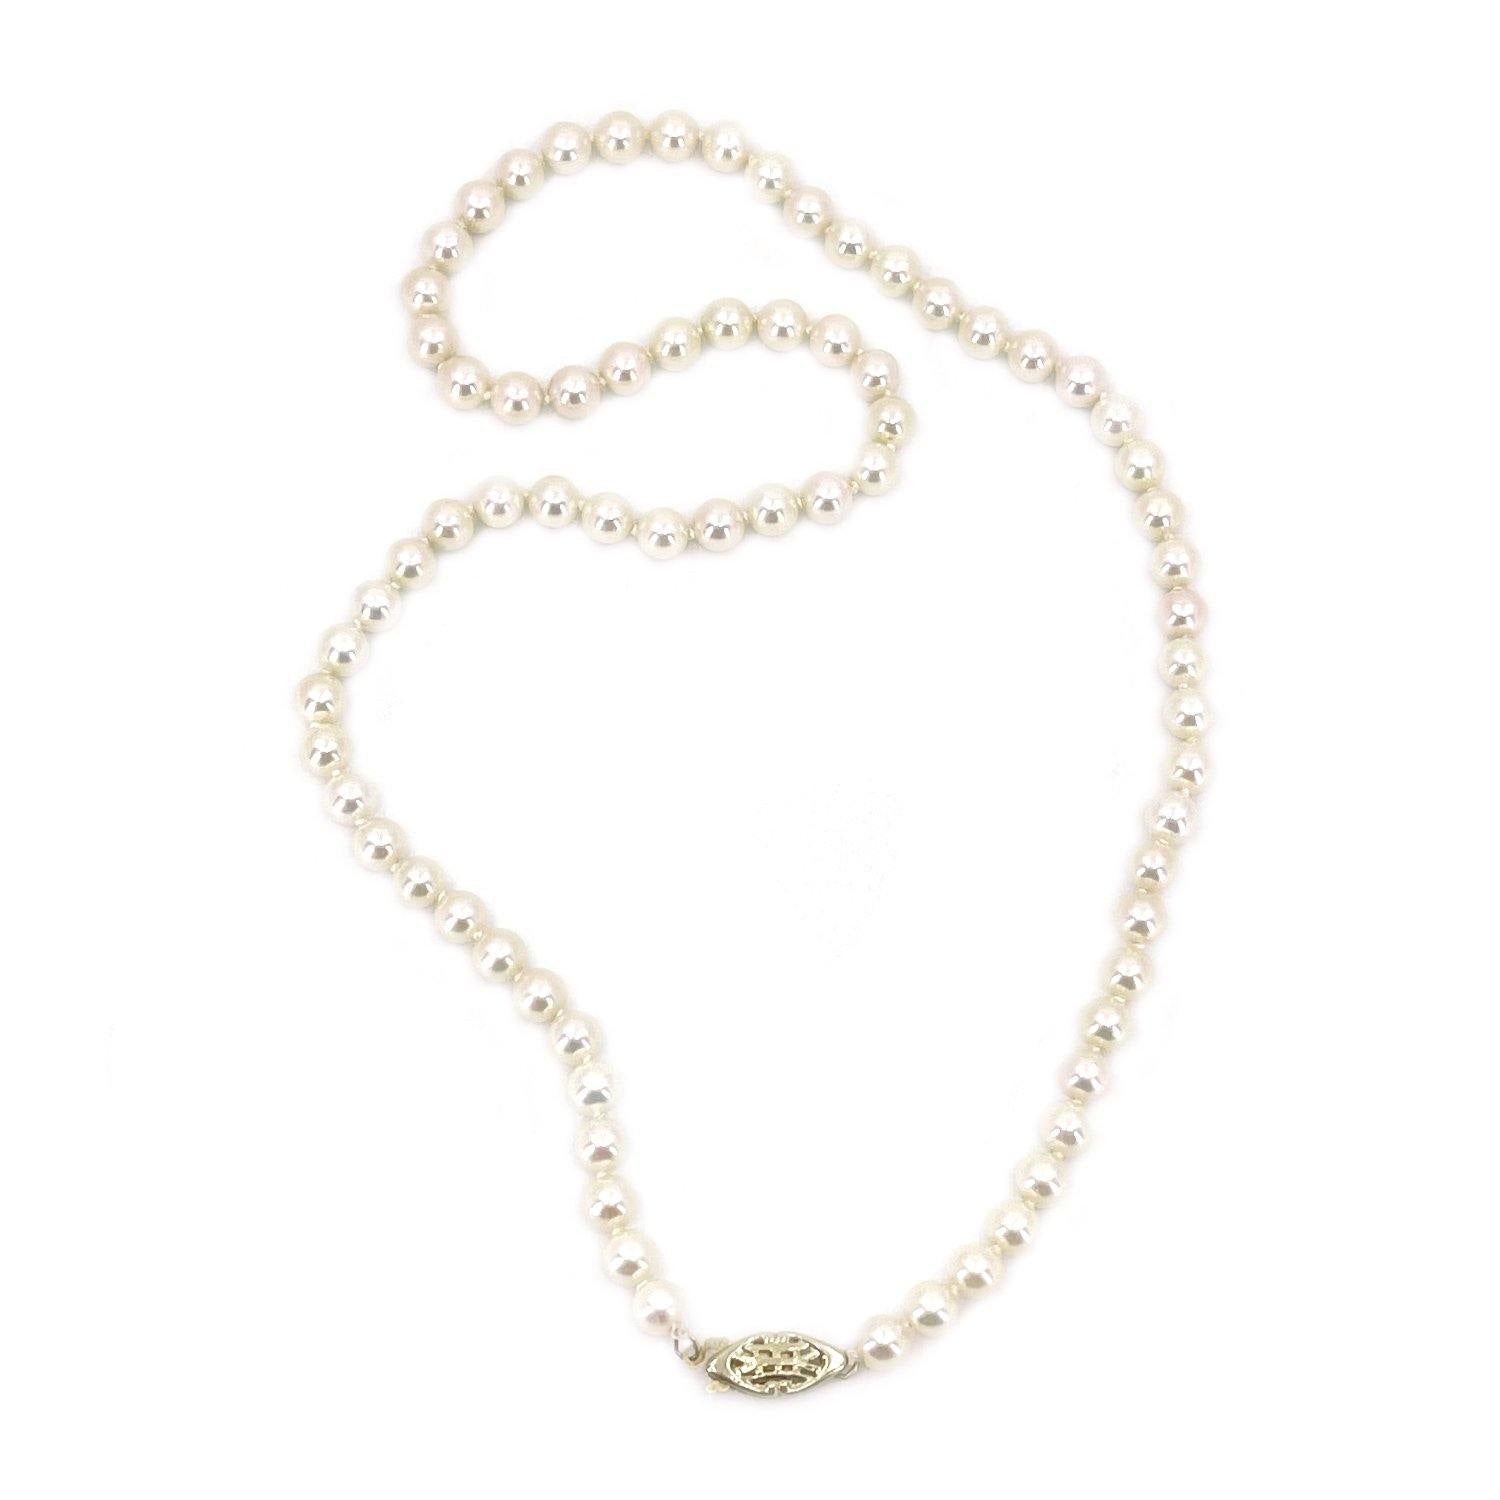 High Quality Japanese Saltwater Cultured Akoya Pearl Strand - 14K Yellow Gold 18 Inch